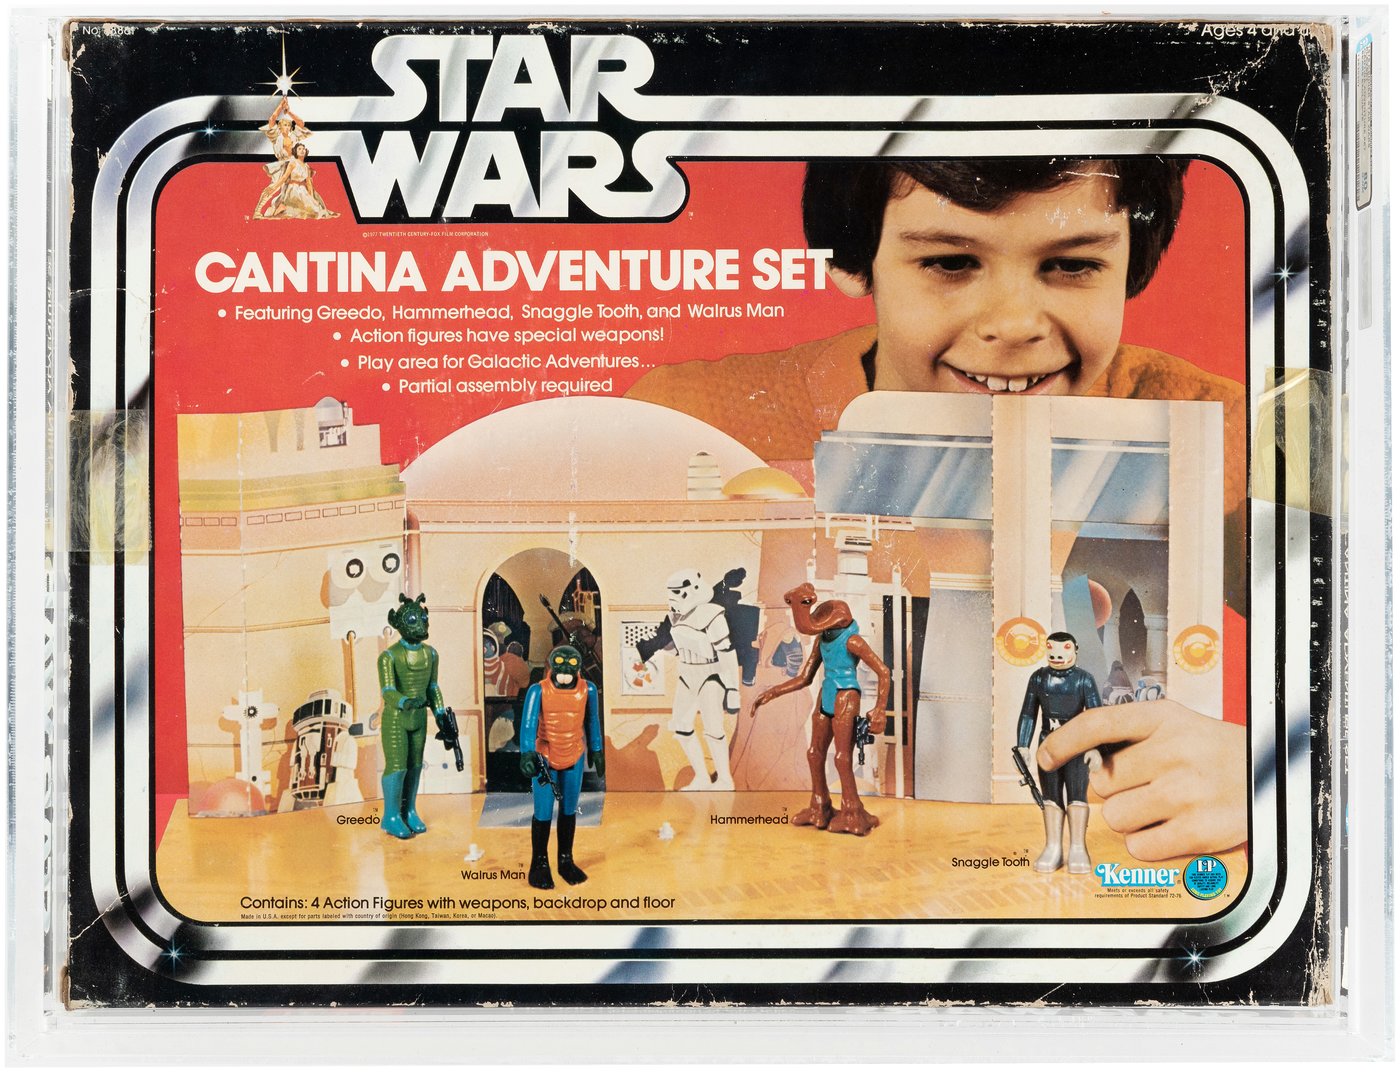 Up close with new Star Wars Cantina Showdown playset - CNET